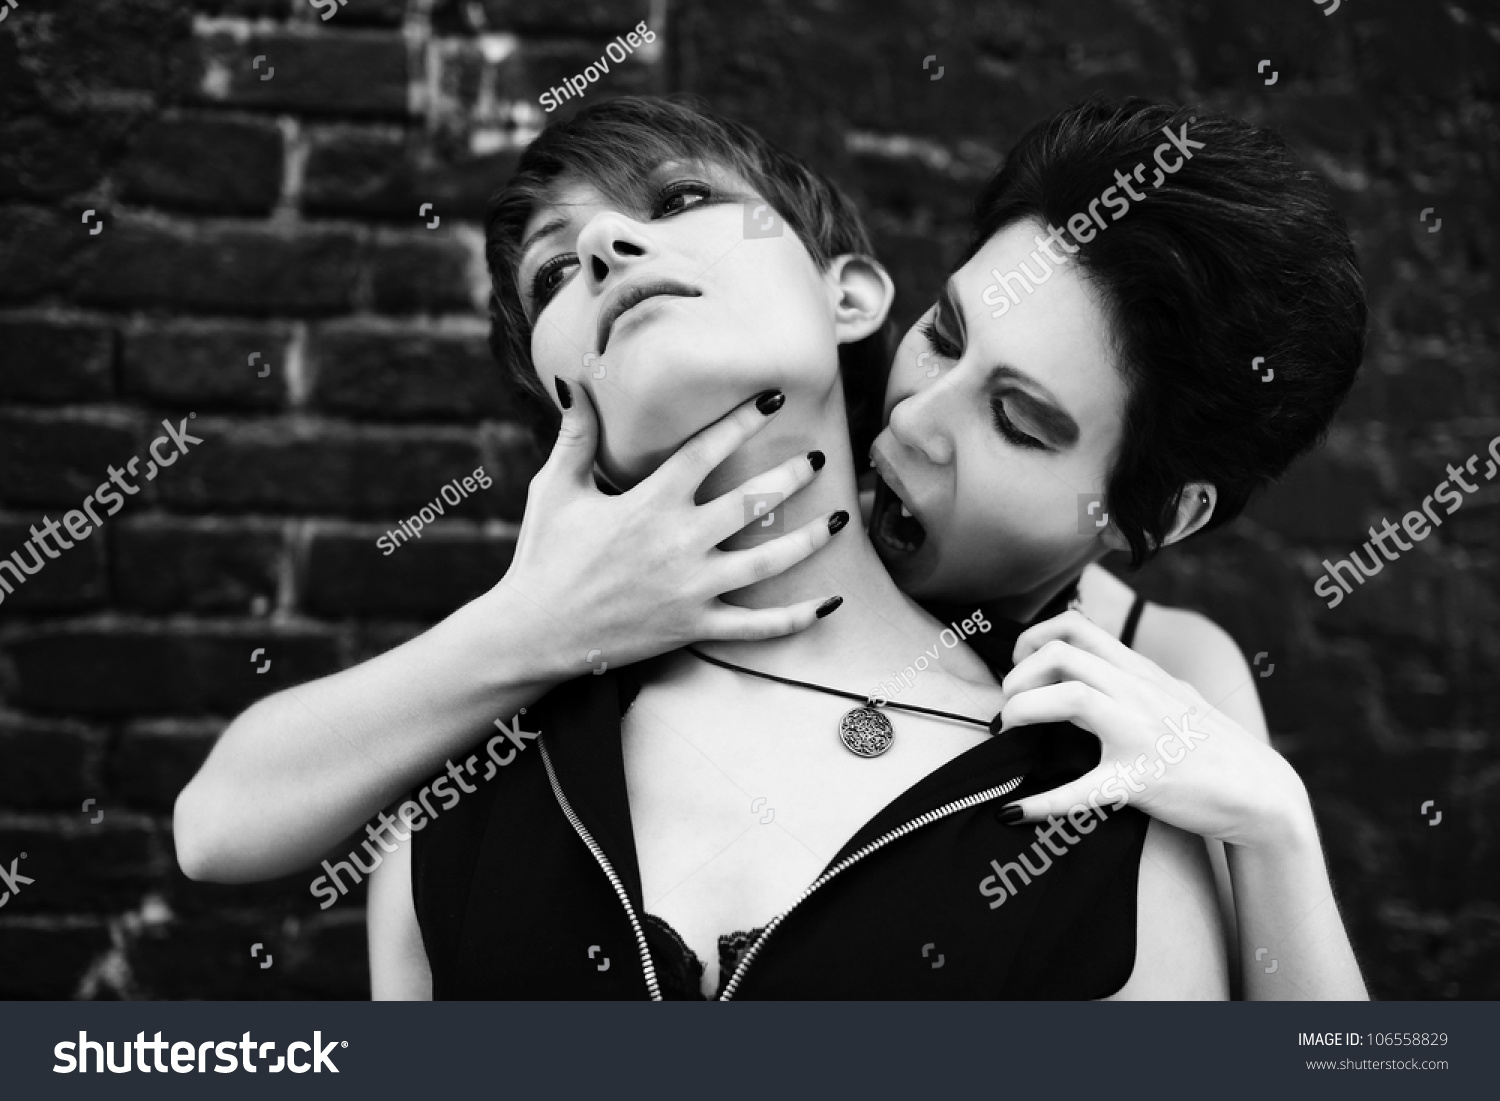 Find Portrait Vampire Biting Young Woman stock images in HD and millions of...